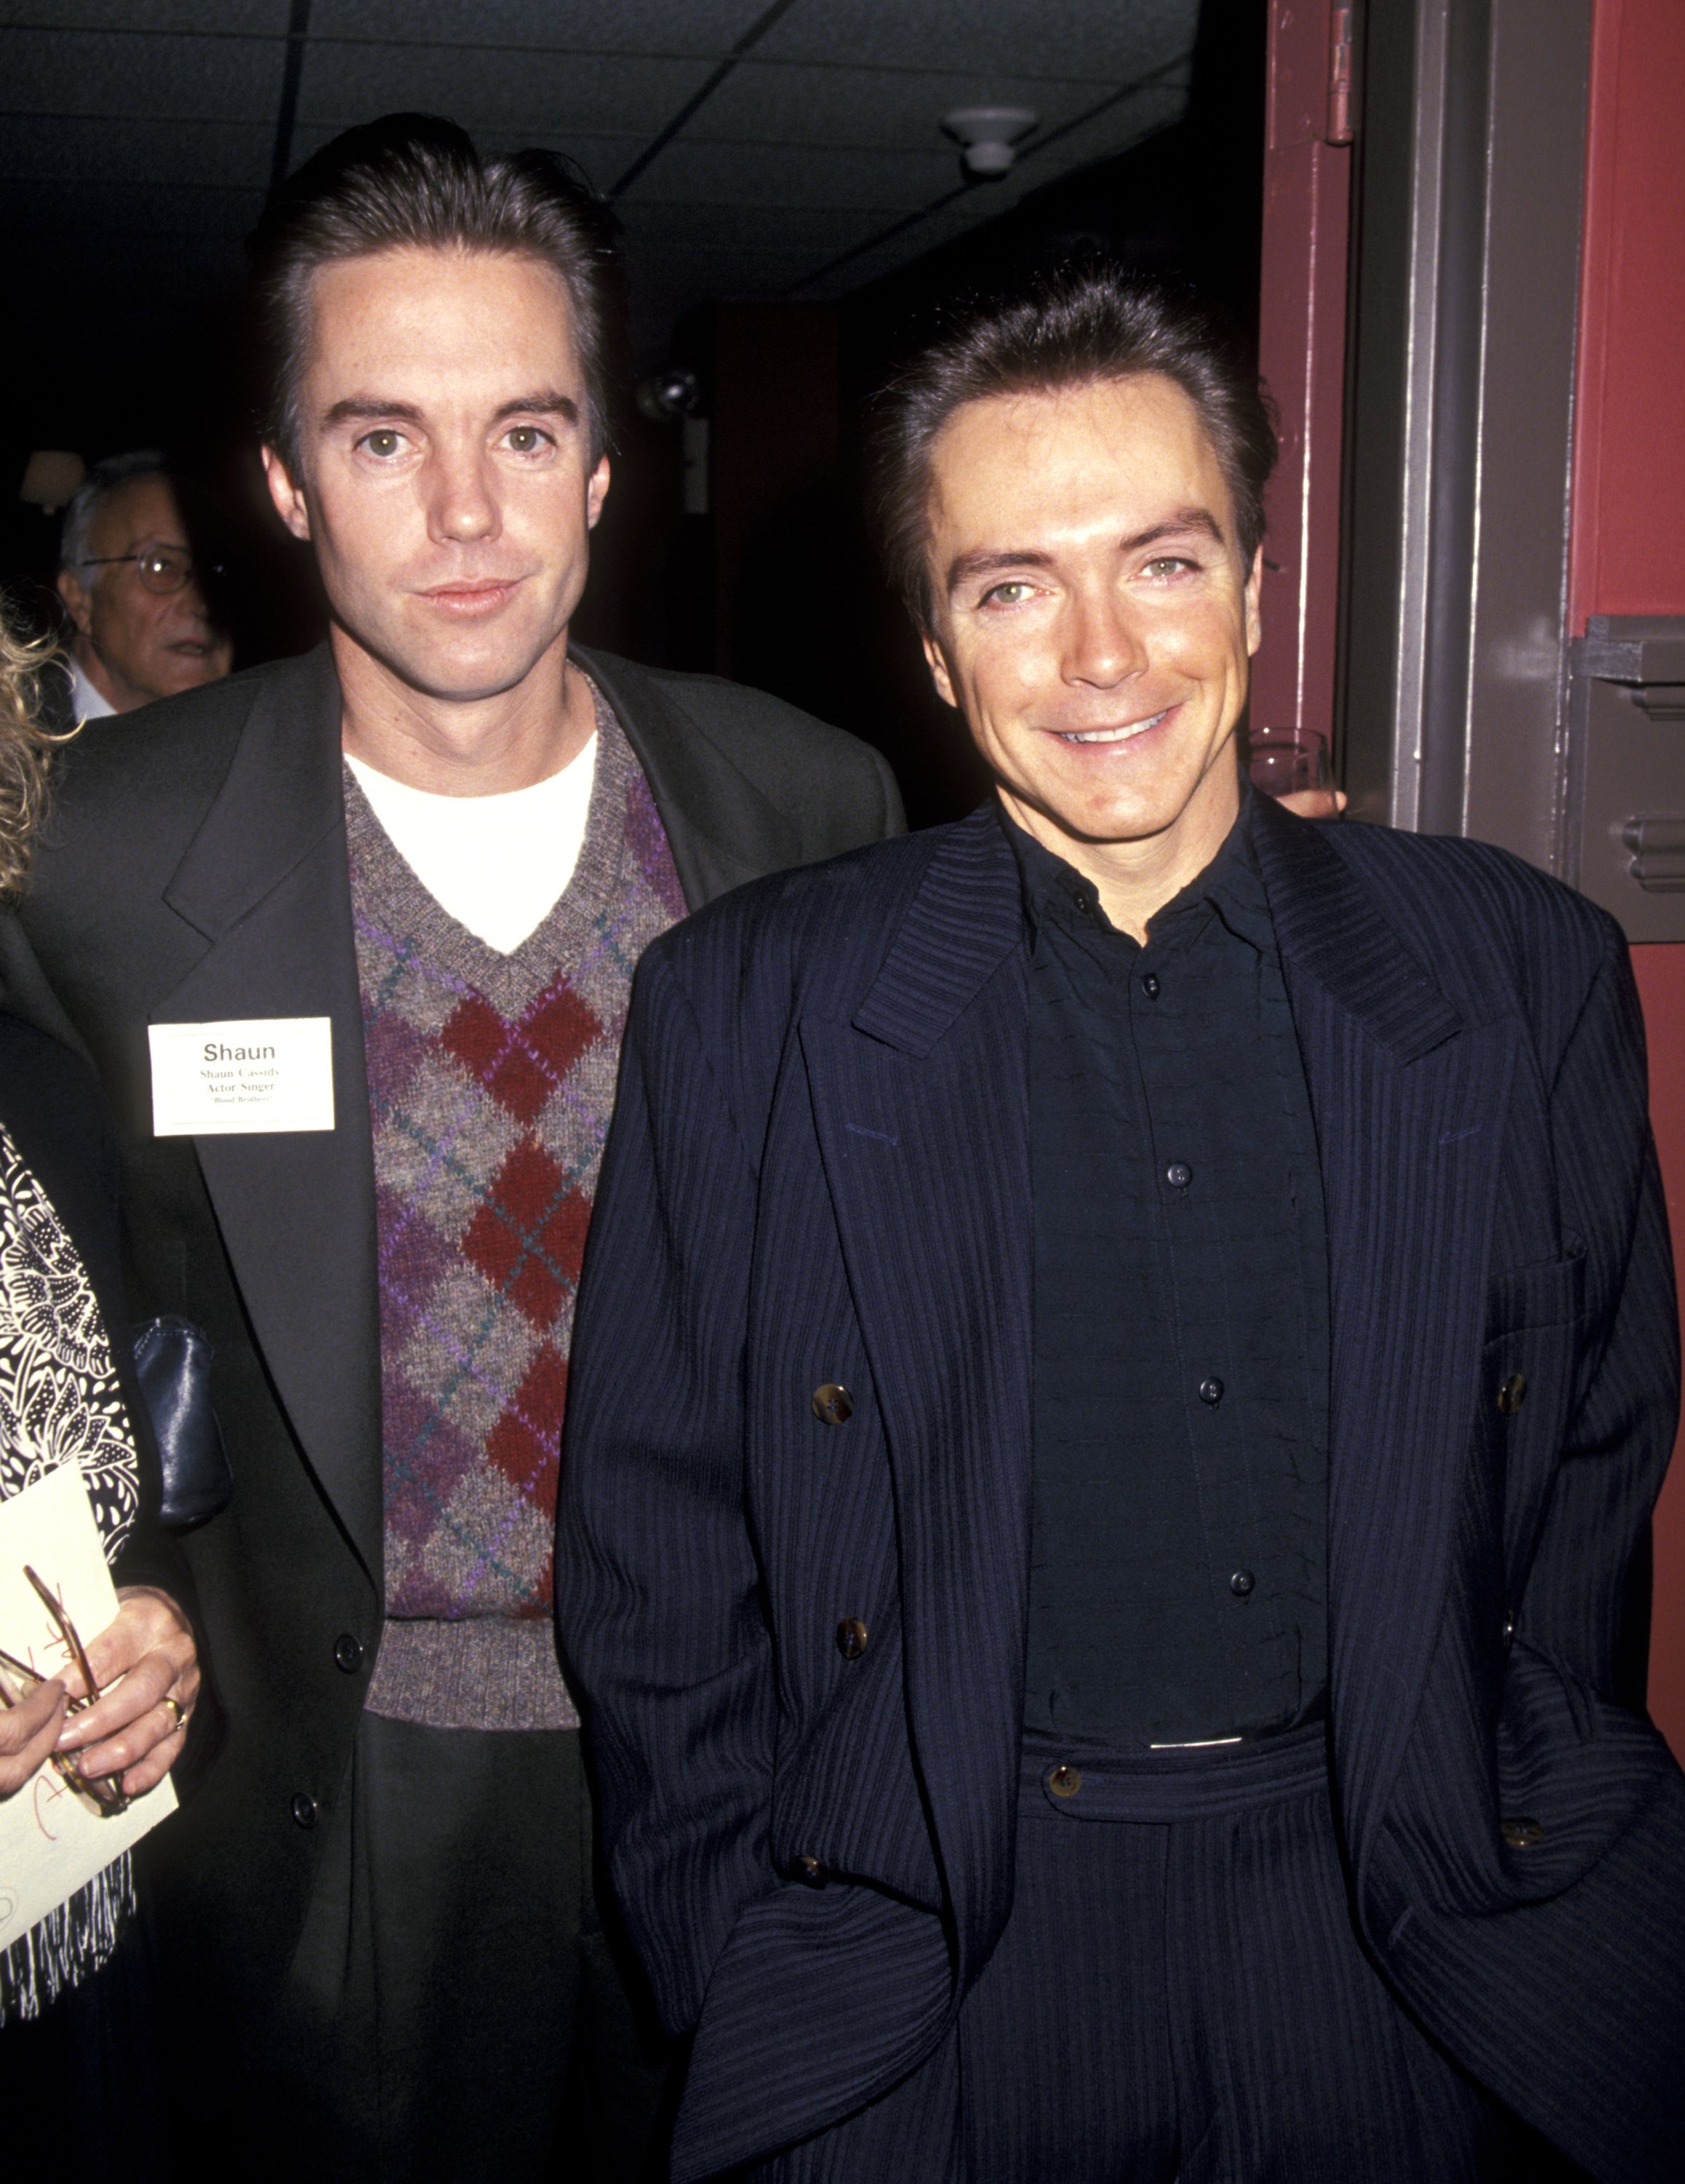 Shaun and David Cassidy during St. Clare's Hospital Benefit Luncheon in New York City, on October 6, 1993 | Source: Getty Images